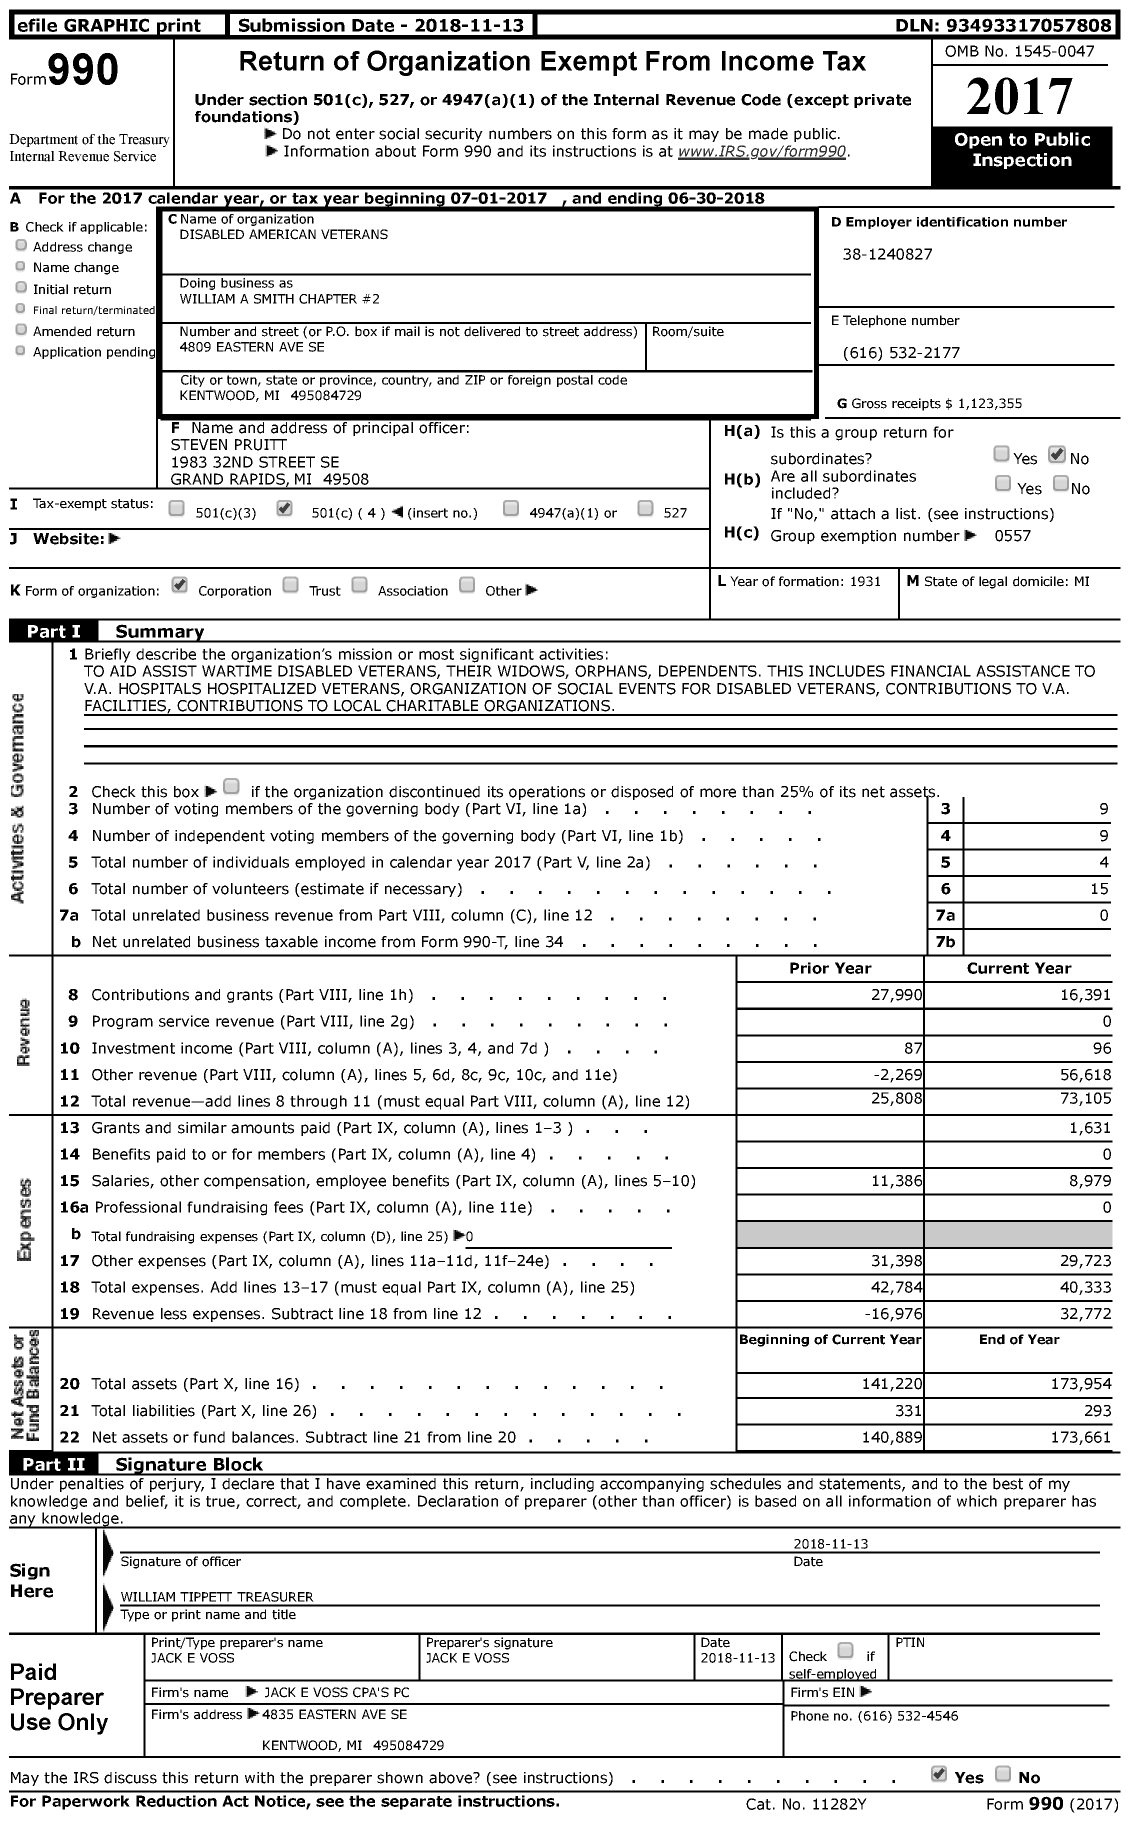 Image of first page of 2017 Form 990 for Disabled American Veterans - 2 WM A Smith JR